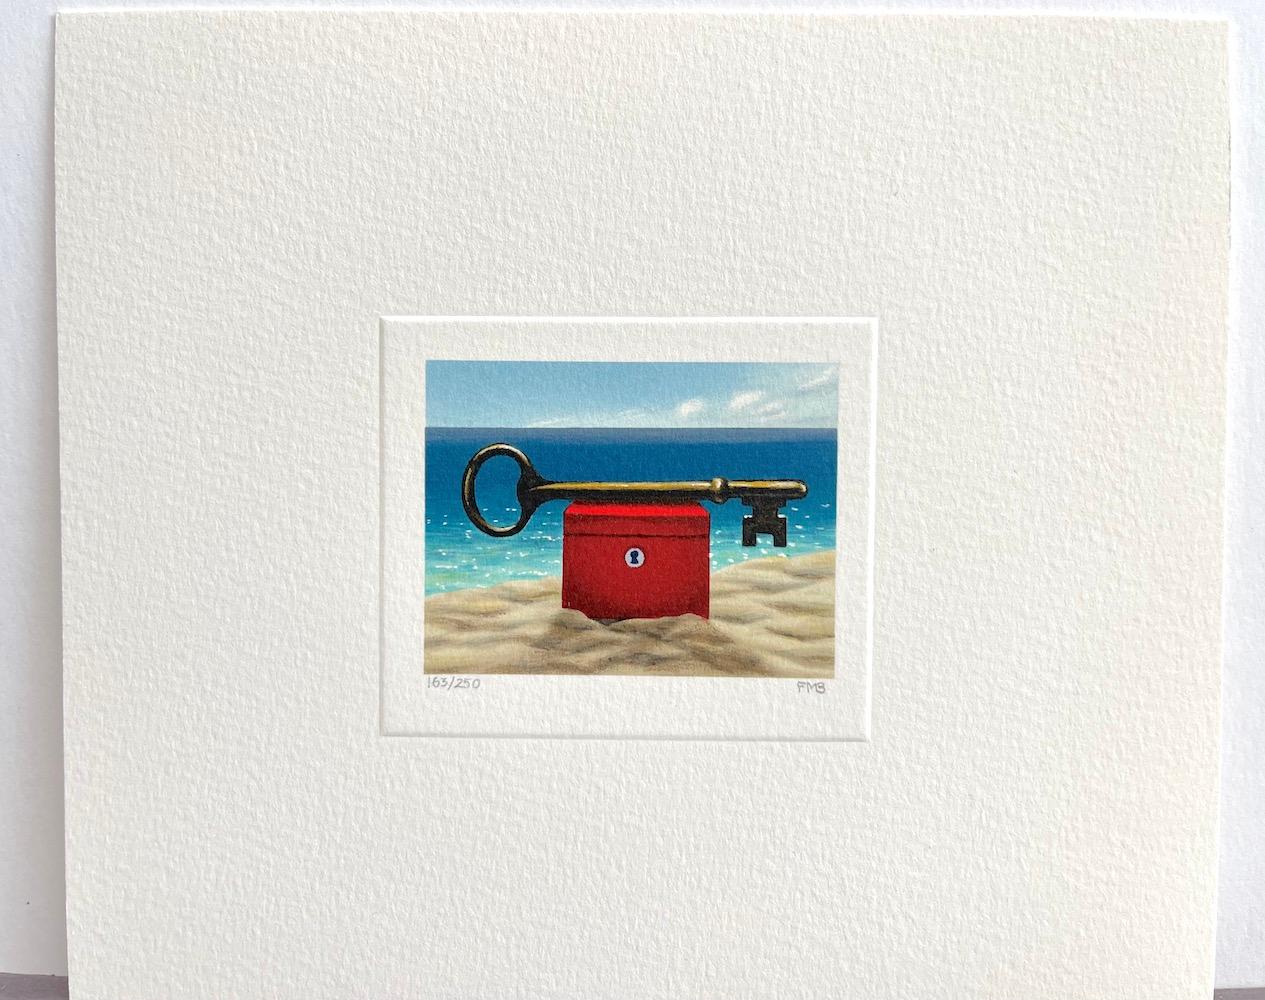 DAYTIME KEY is a rarely seen, hand drawn limited edition lithograph by the American surrealist artist Fanny Brennan, created using traditional hand lithography techniques printed on archival Arches paper, 100% acid-free. DAYTIME KEY is an engaging